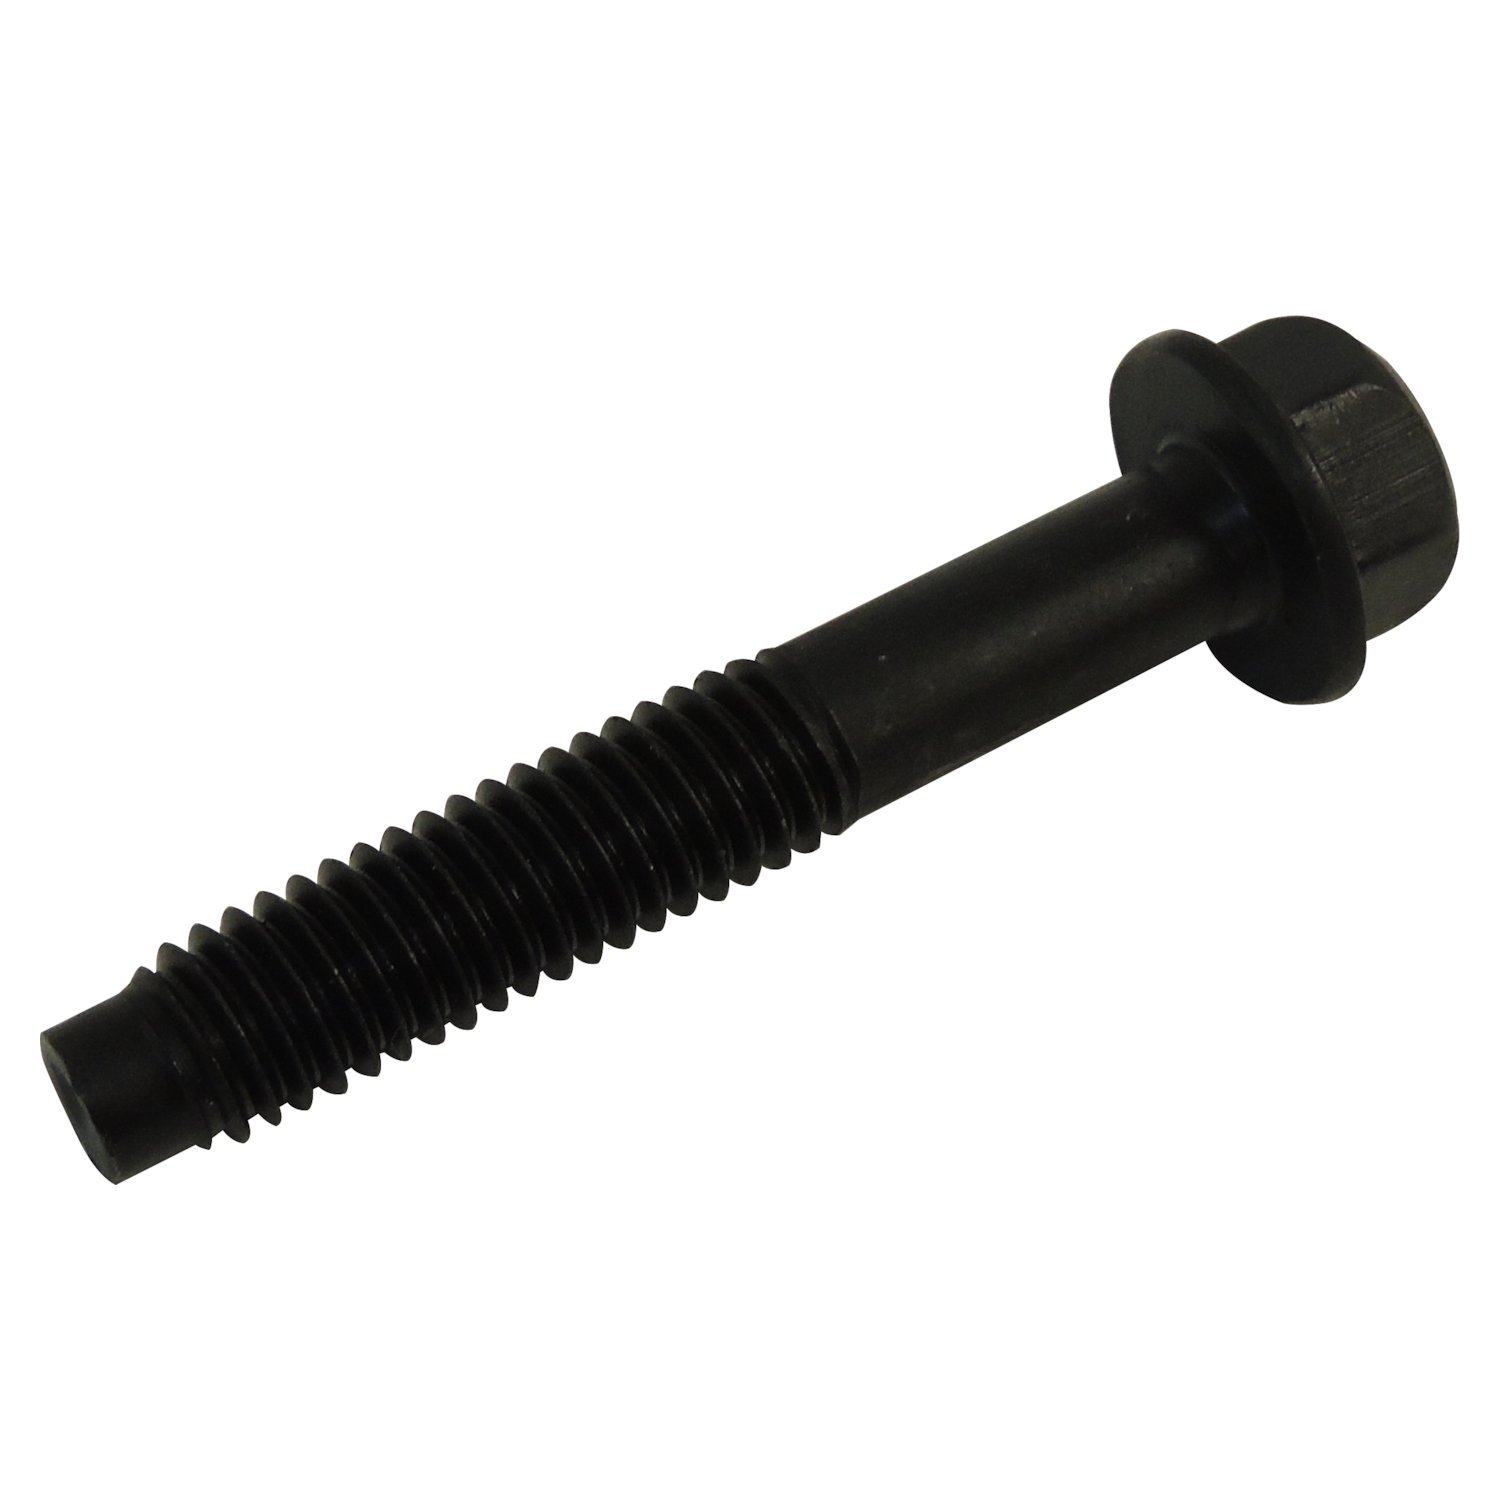 Body Mount Bolt; 7/16 in. -14 x 2-3/4 in. Flanged Grade 8 Bolt; 5 Required;